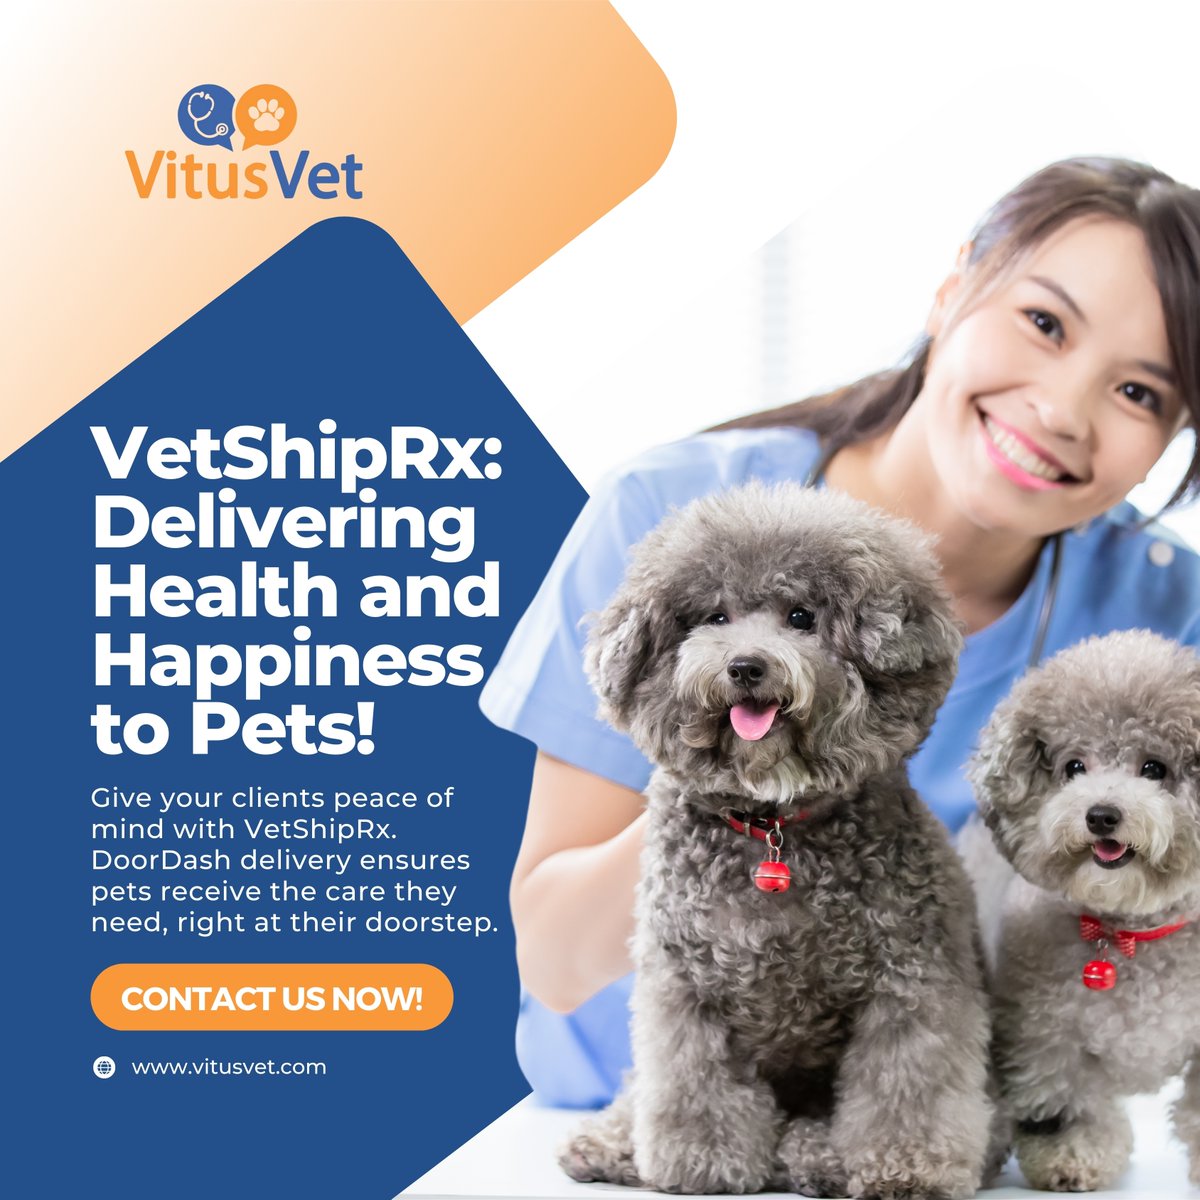 Health and happiness, are delivered! 

VetShipRx brings peace of mind to your clients, ensuring pets receive the care they deserve. 🚚🐾 

🐾 For more information, visit vitusvet.com 

#VitusVet #VetShipRx #PetHealth #VitusVetRevolution #SmartPetCare